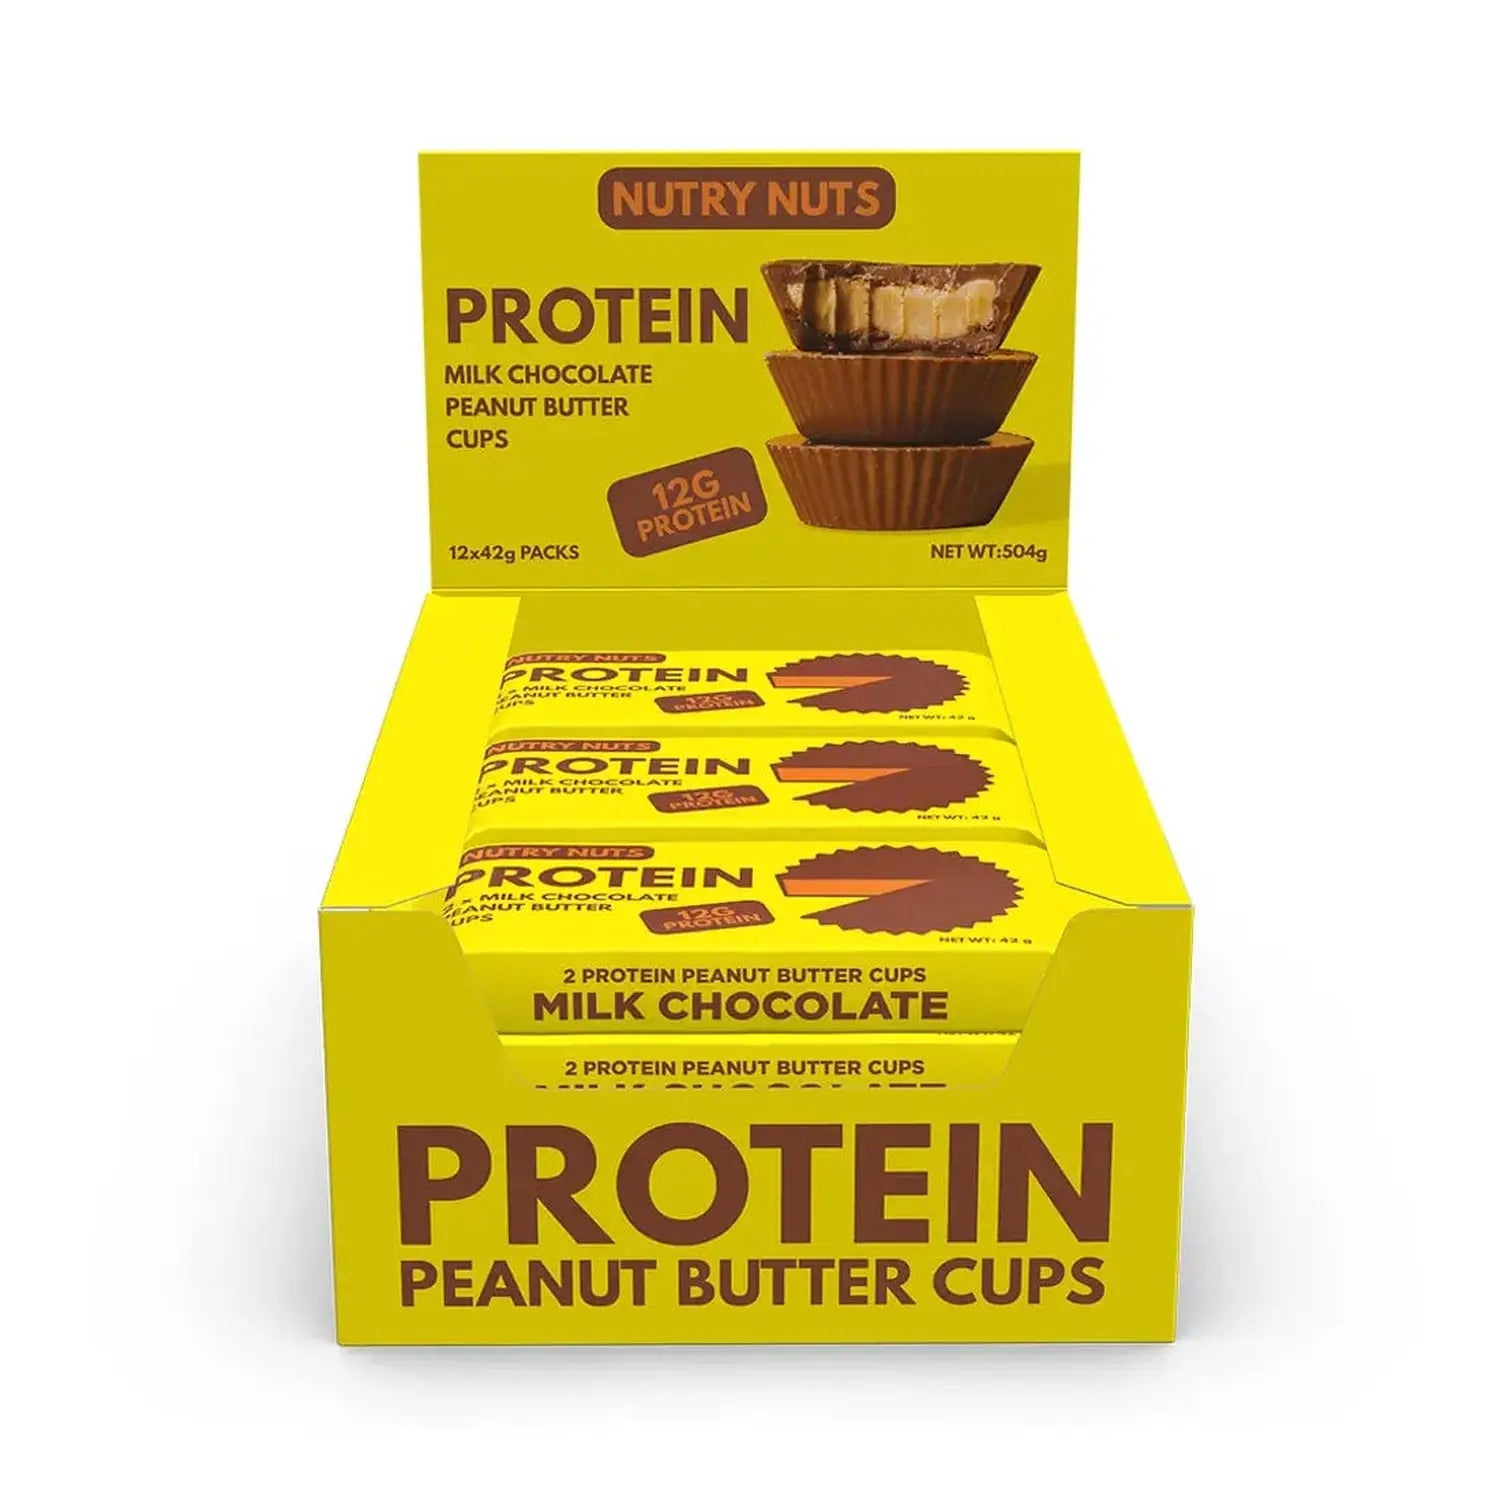 Nutry Nuts Nutry Nuts - Protein Peanut Butter Cups 12 x 42 g Milk Chocolate kaufen bei HighPowered.ch